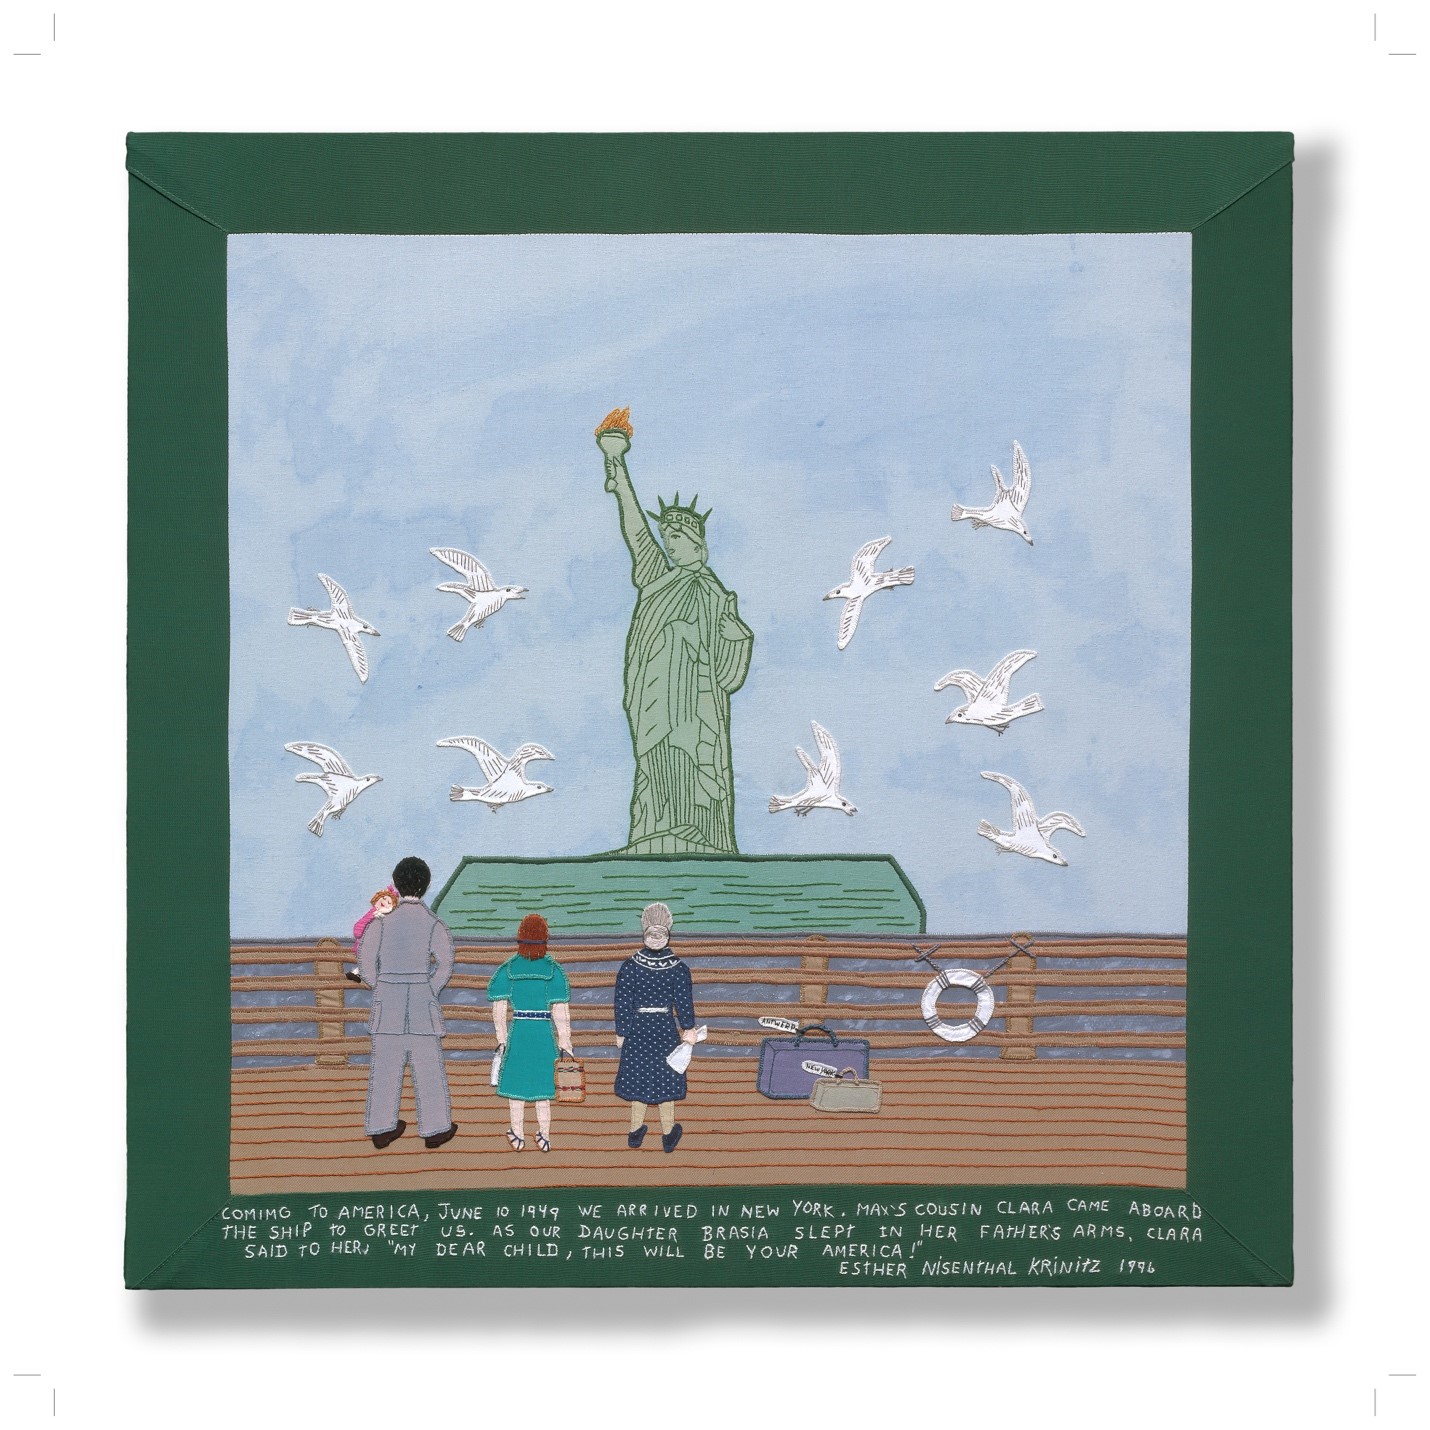 A story cloth of the statue of liberty and seagulls flying around it while a man, woman and older woman look at it on a board walk.